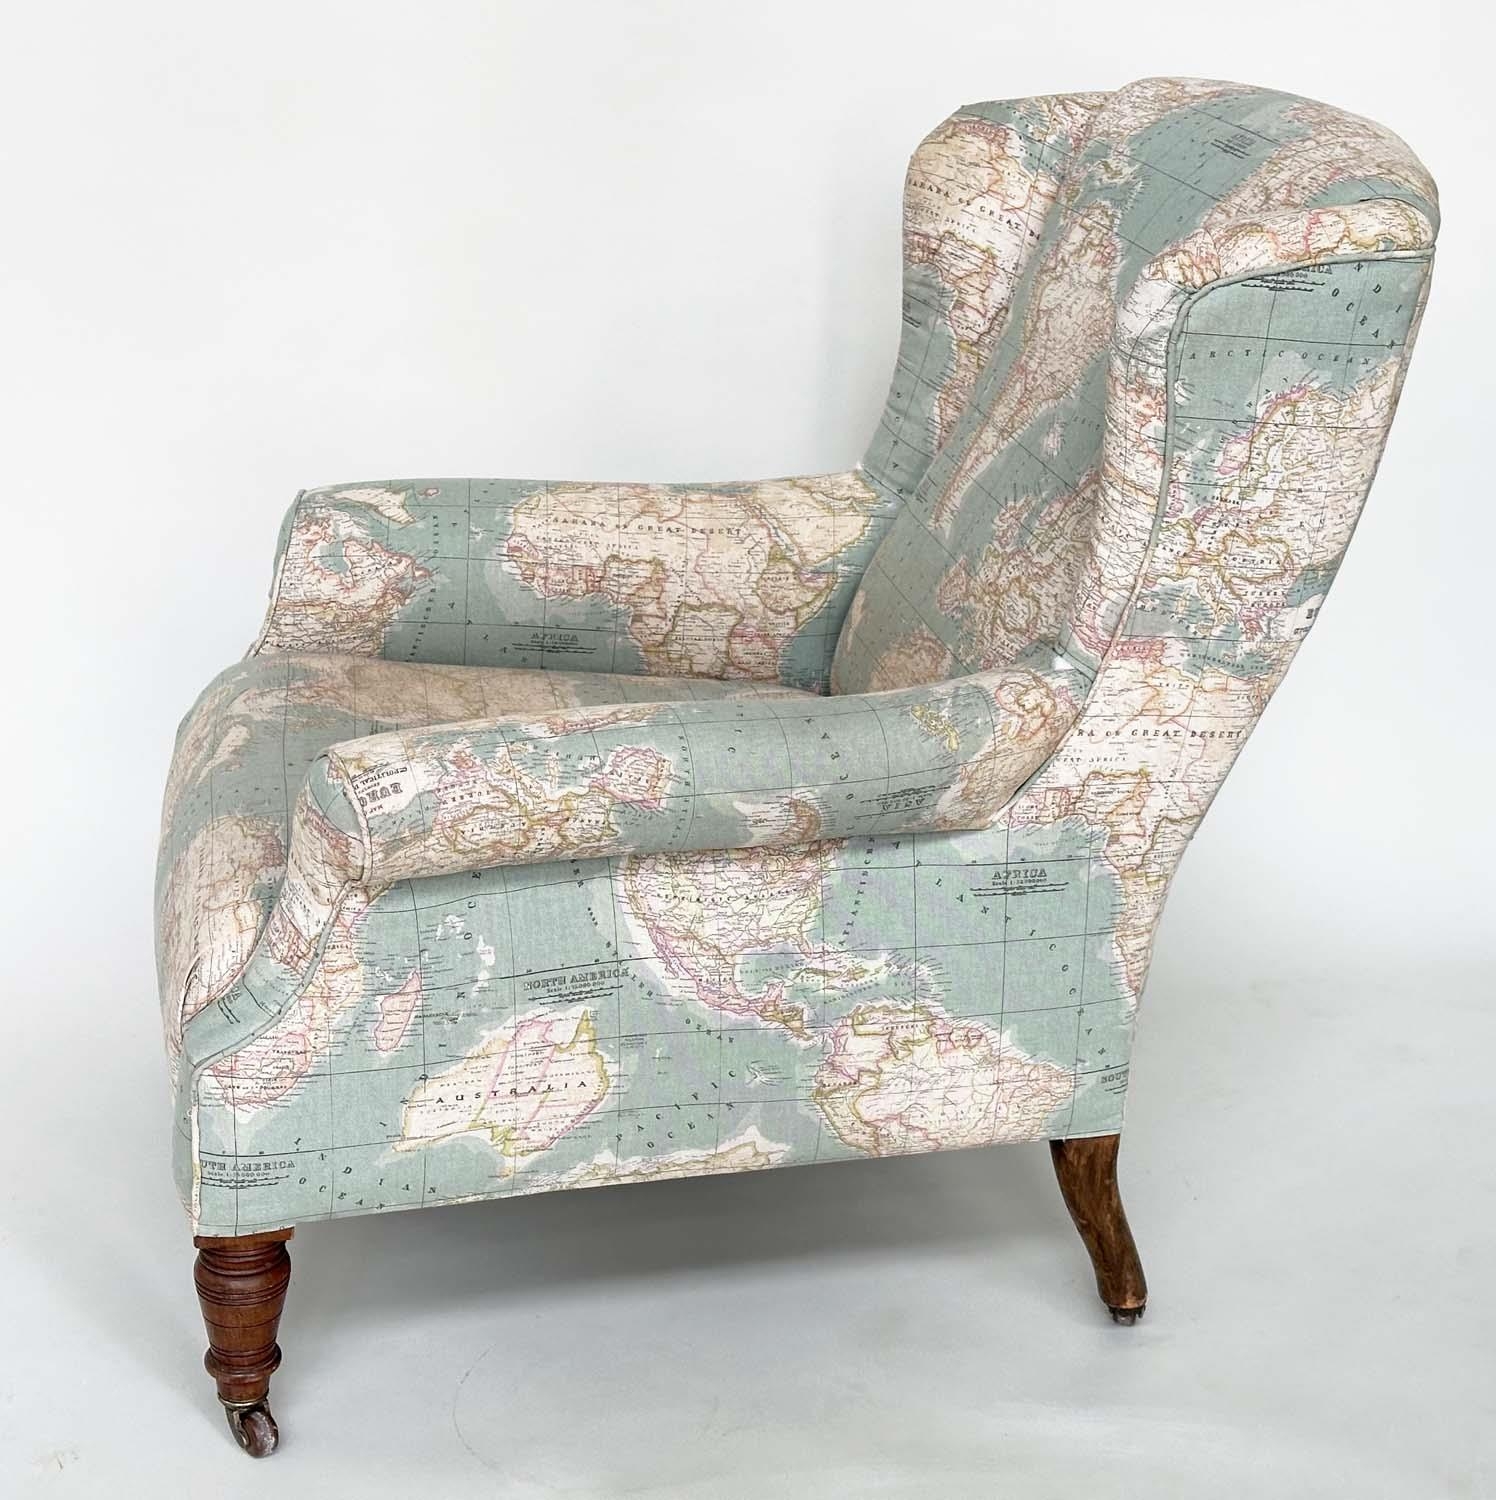 WING ARMCHAIR, Victorian walnut with circa 1900 World Atlas printed fabric upholstery scroll arms - Image 10 of 12